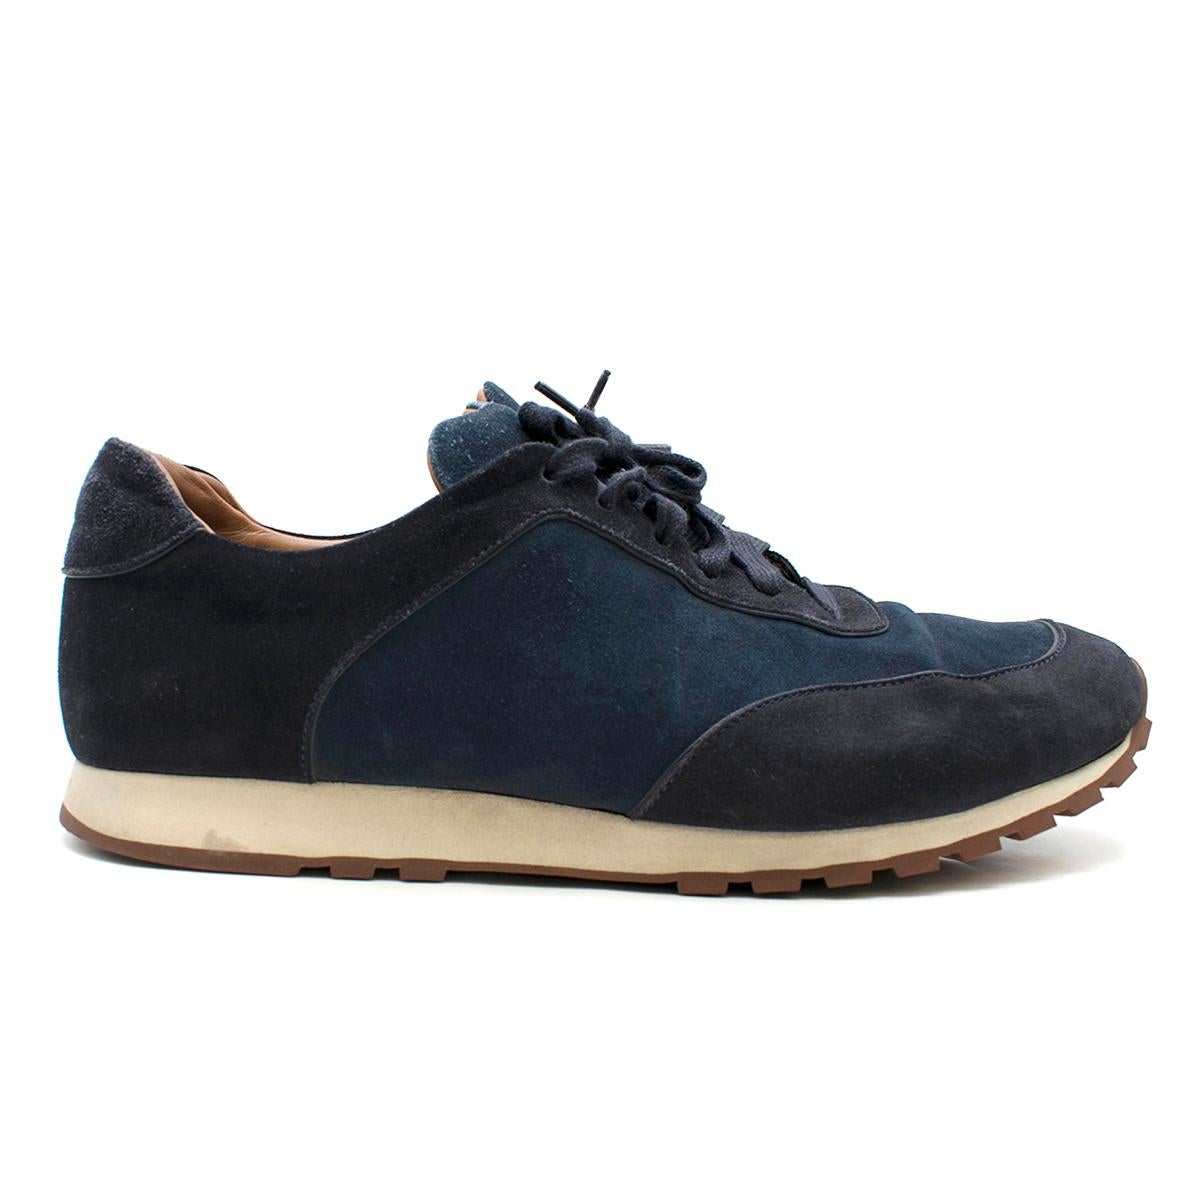 Loro Piana Navy Weekend Walk Suede Sneakers

- Navy suede sneakers
- Treated with a light water-repellent, stain-resistant finish
- Front lace up
- Brown leather lining with logo embroidered
- Microporous sole with light rubber tread featuring the